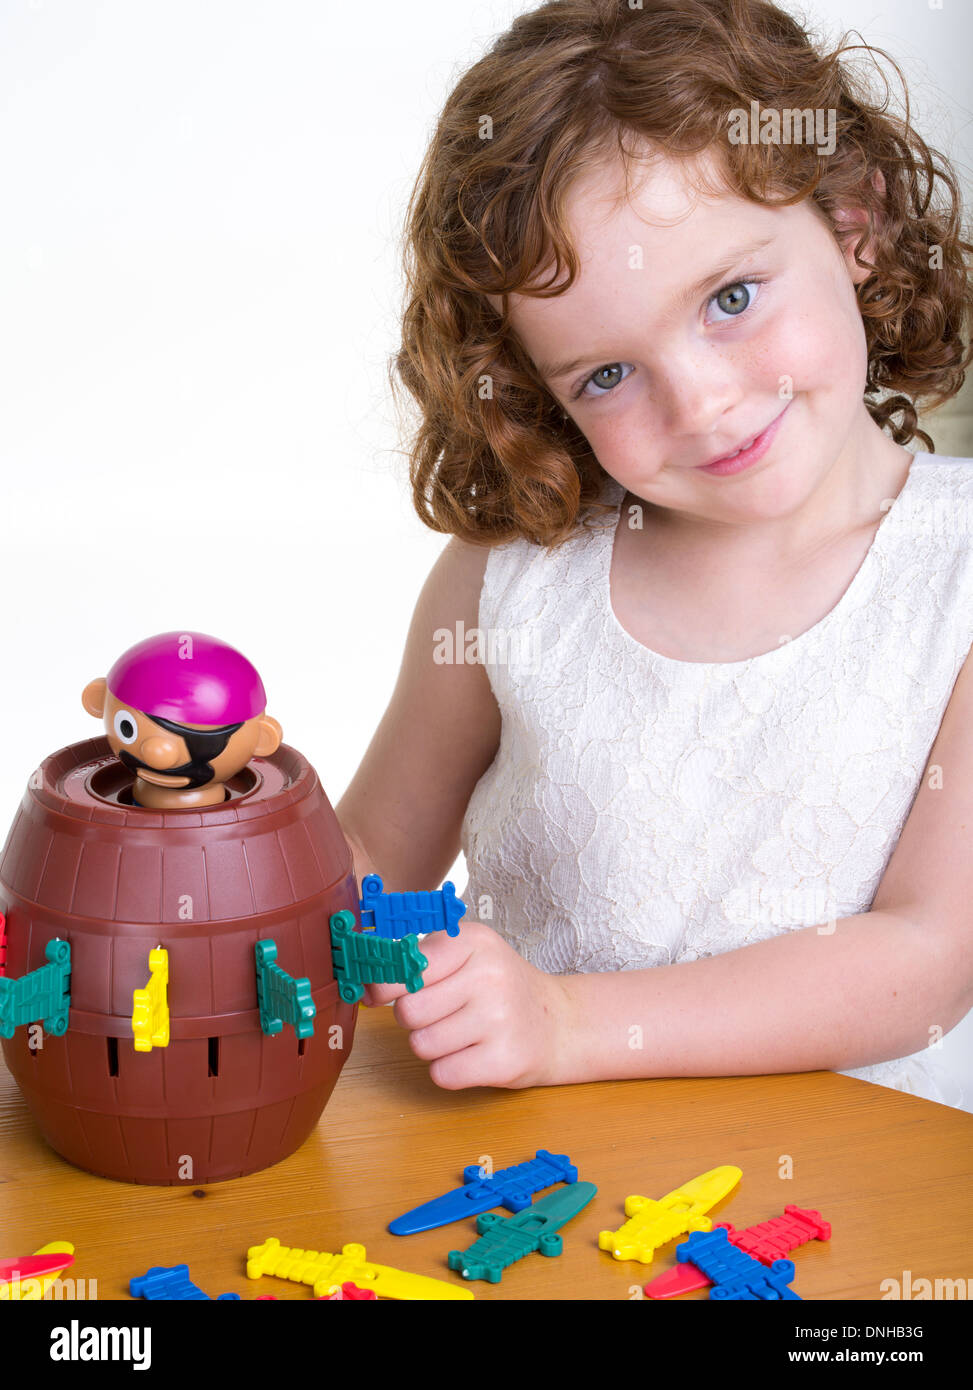 Young girl playing Pop-up Pirate game by Hasbro Stock Photo